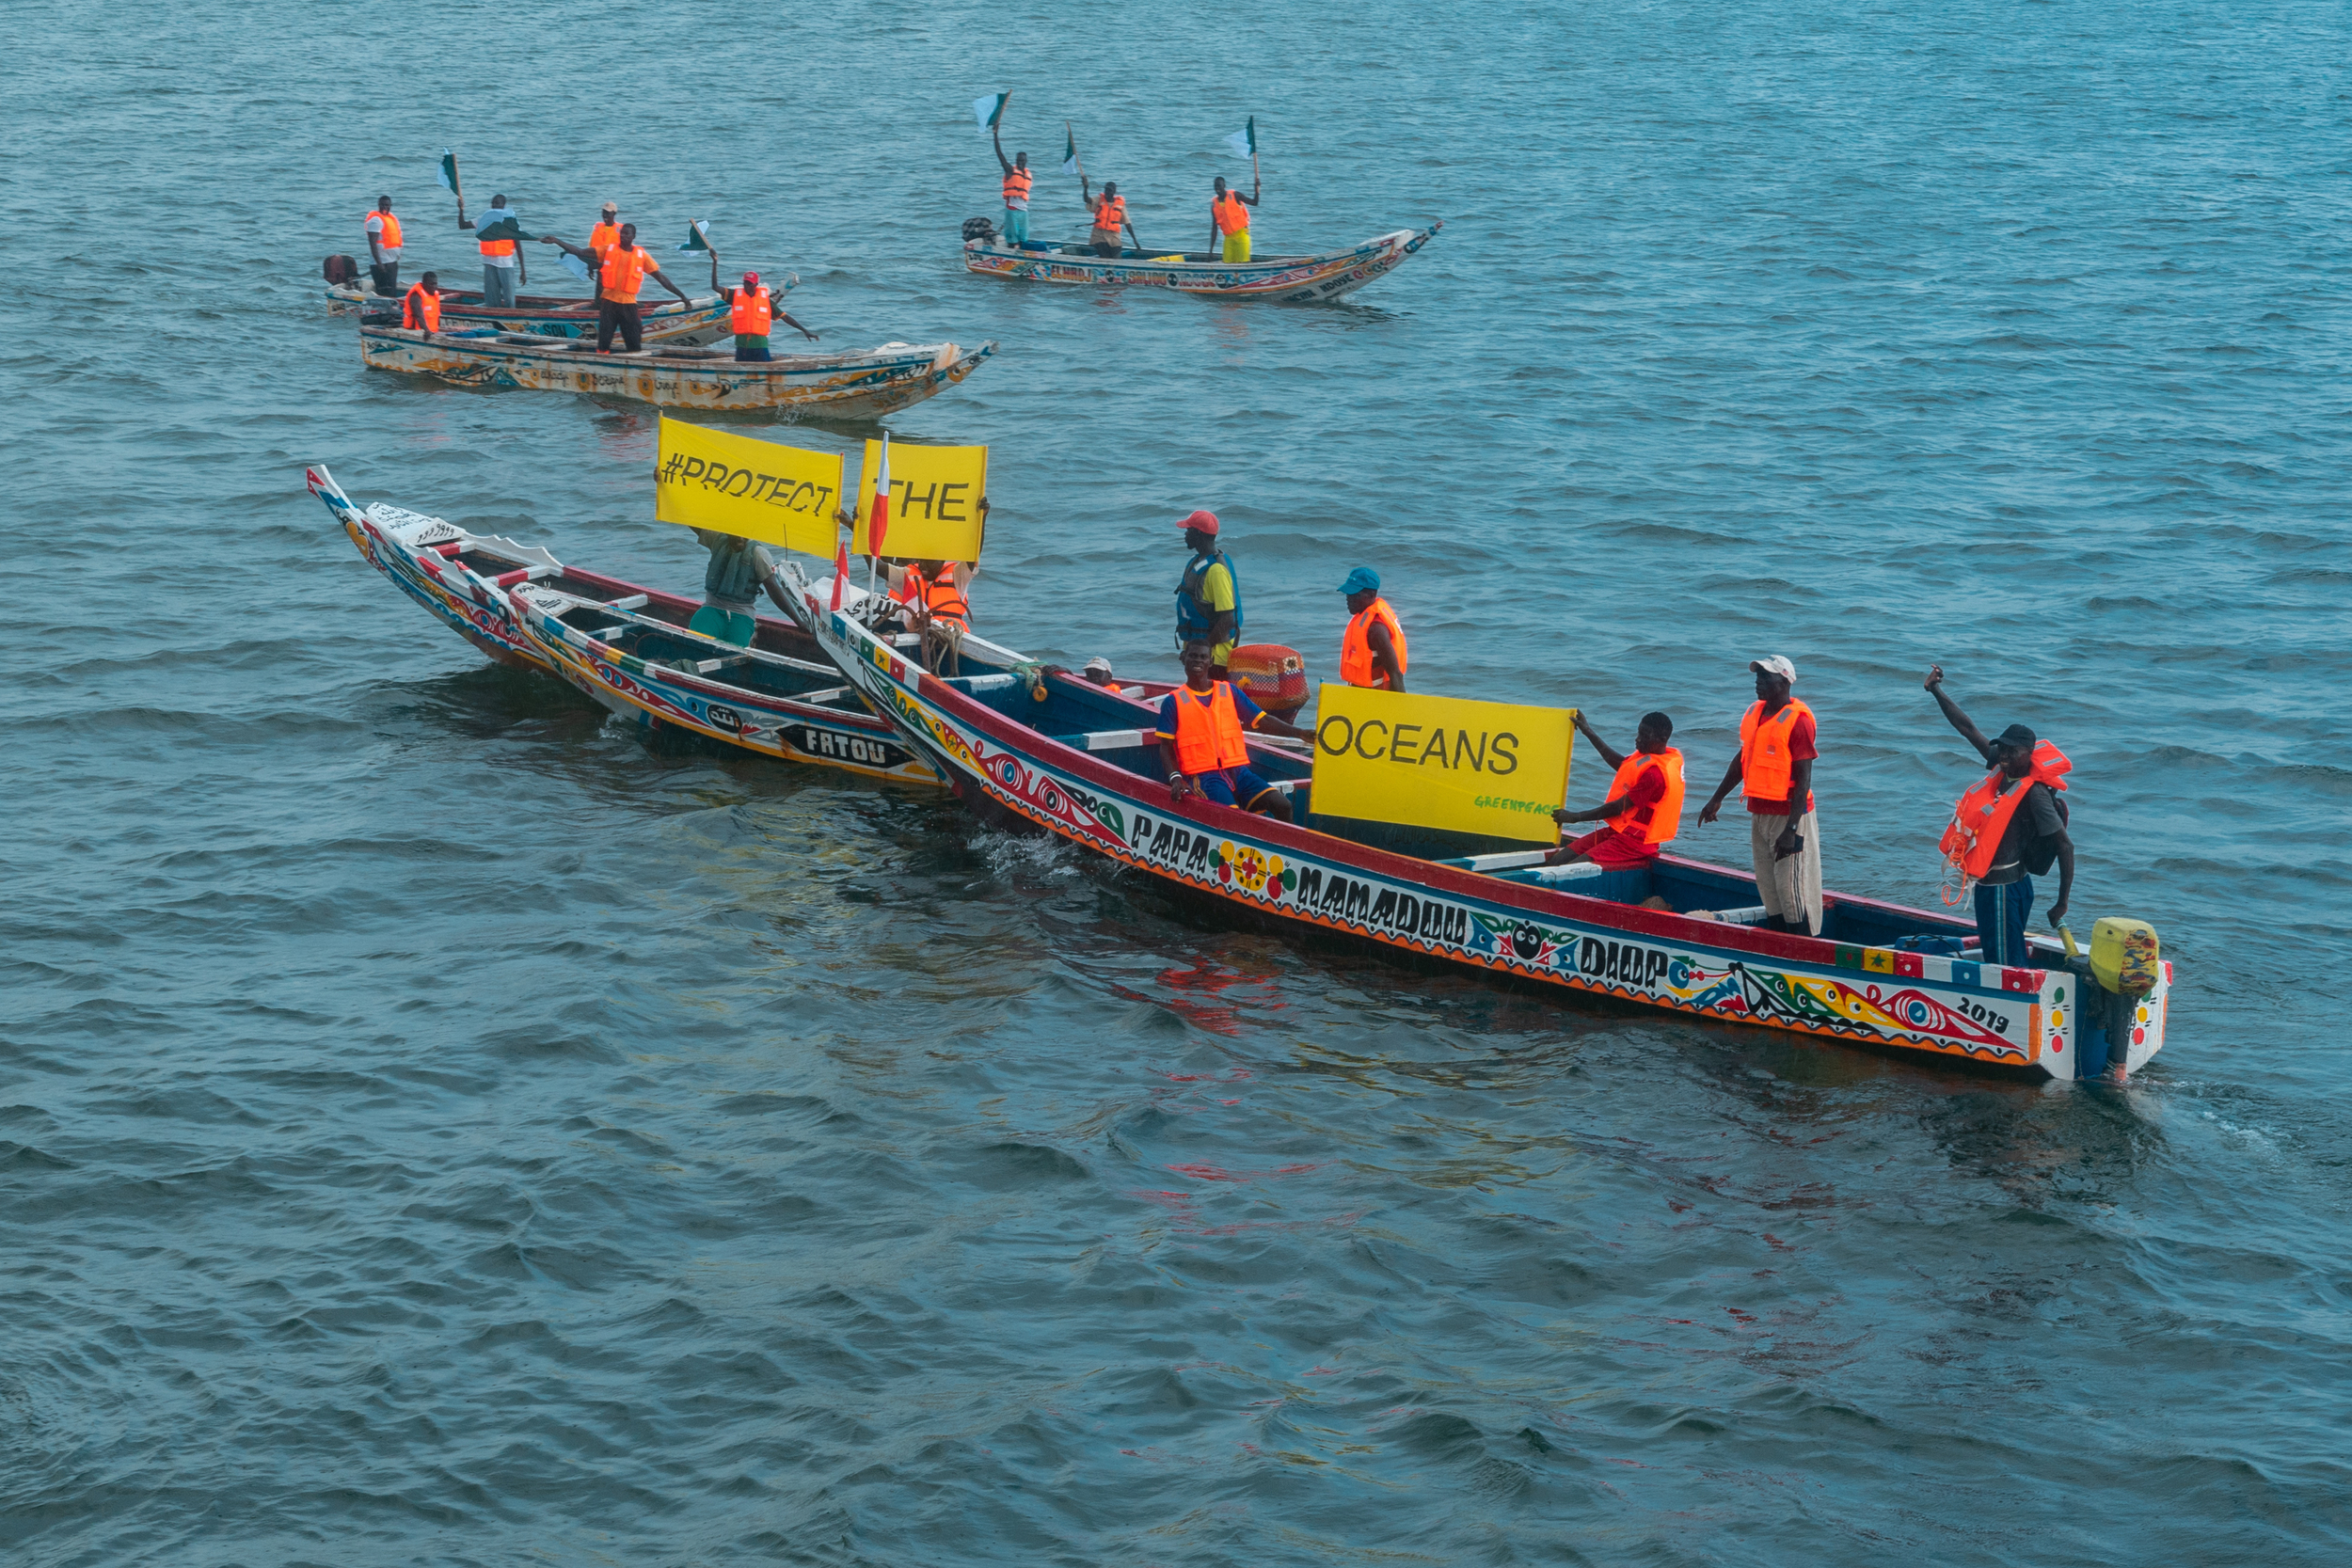 Local fishermen on colourful traditional boats display banners with various messages including “Protect the Oceans” and “Stop Fishmeal”.